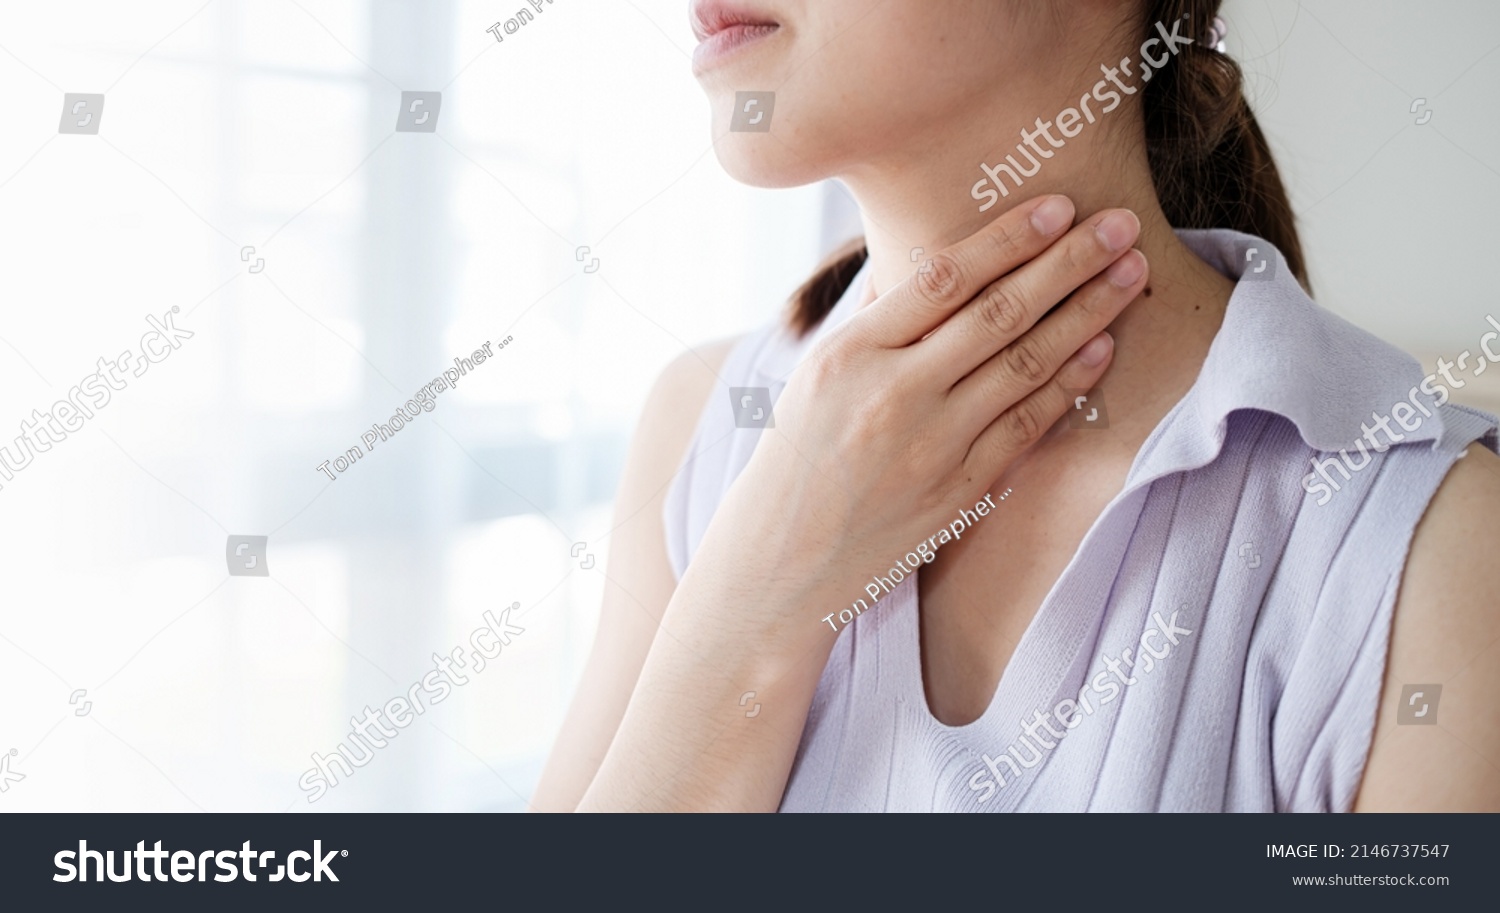 Woman with sore throat inflamed tonsils from influenza symptoms. Healthcare and medical concept #2146737547